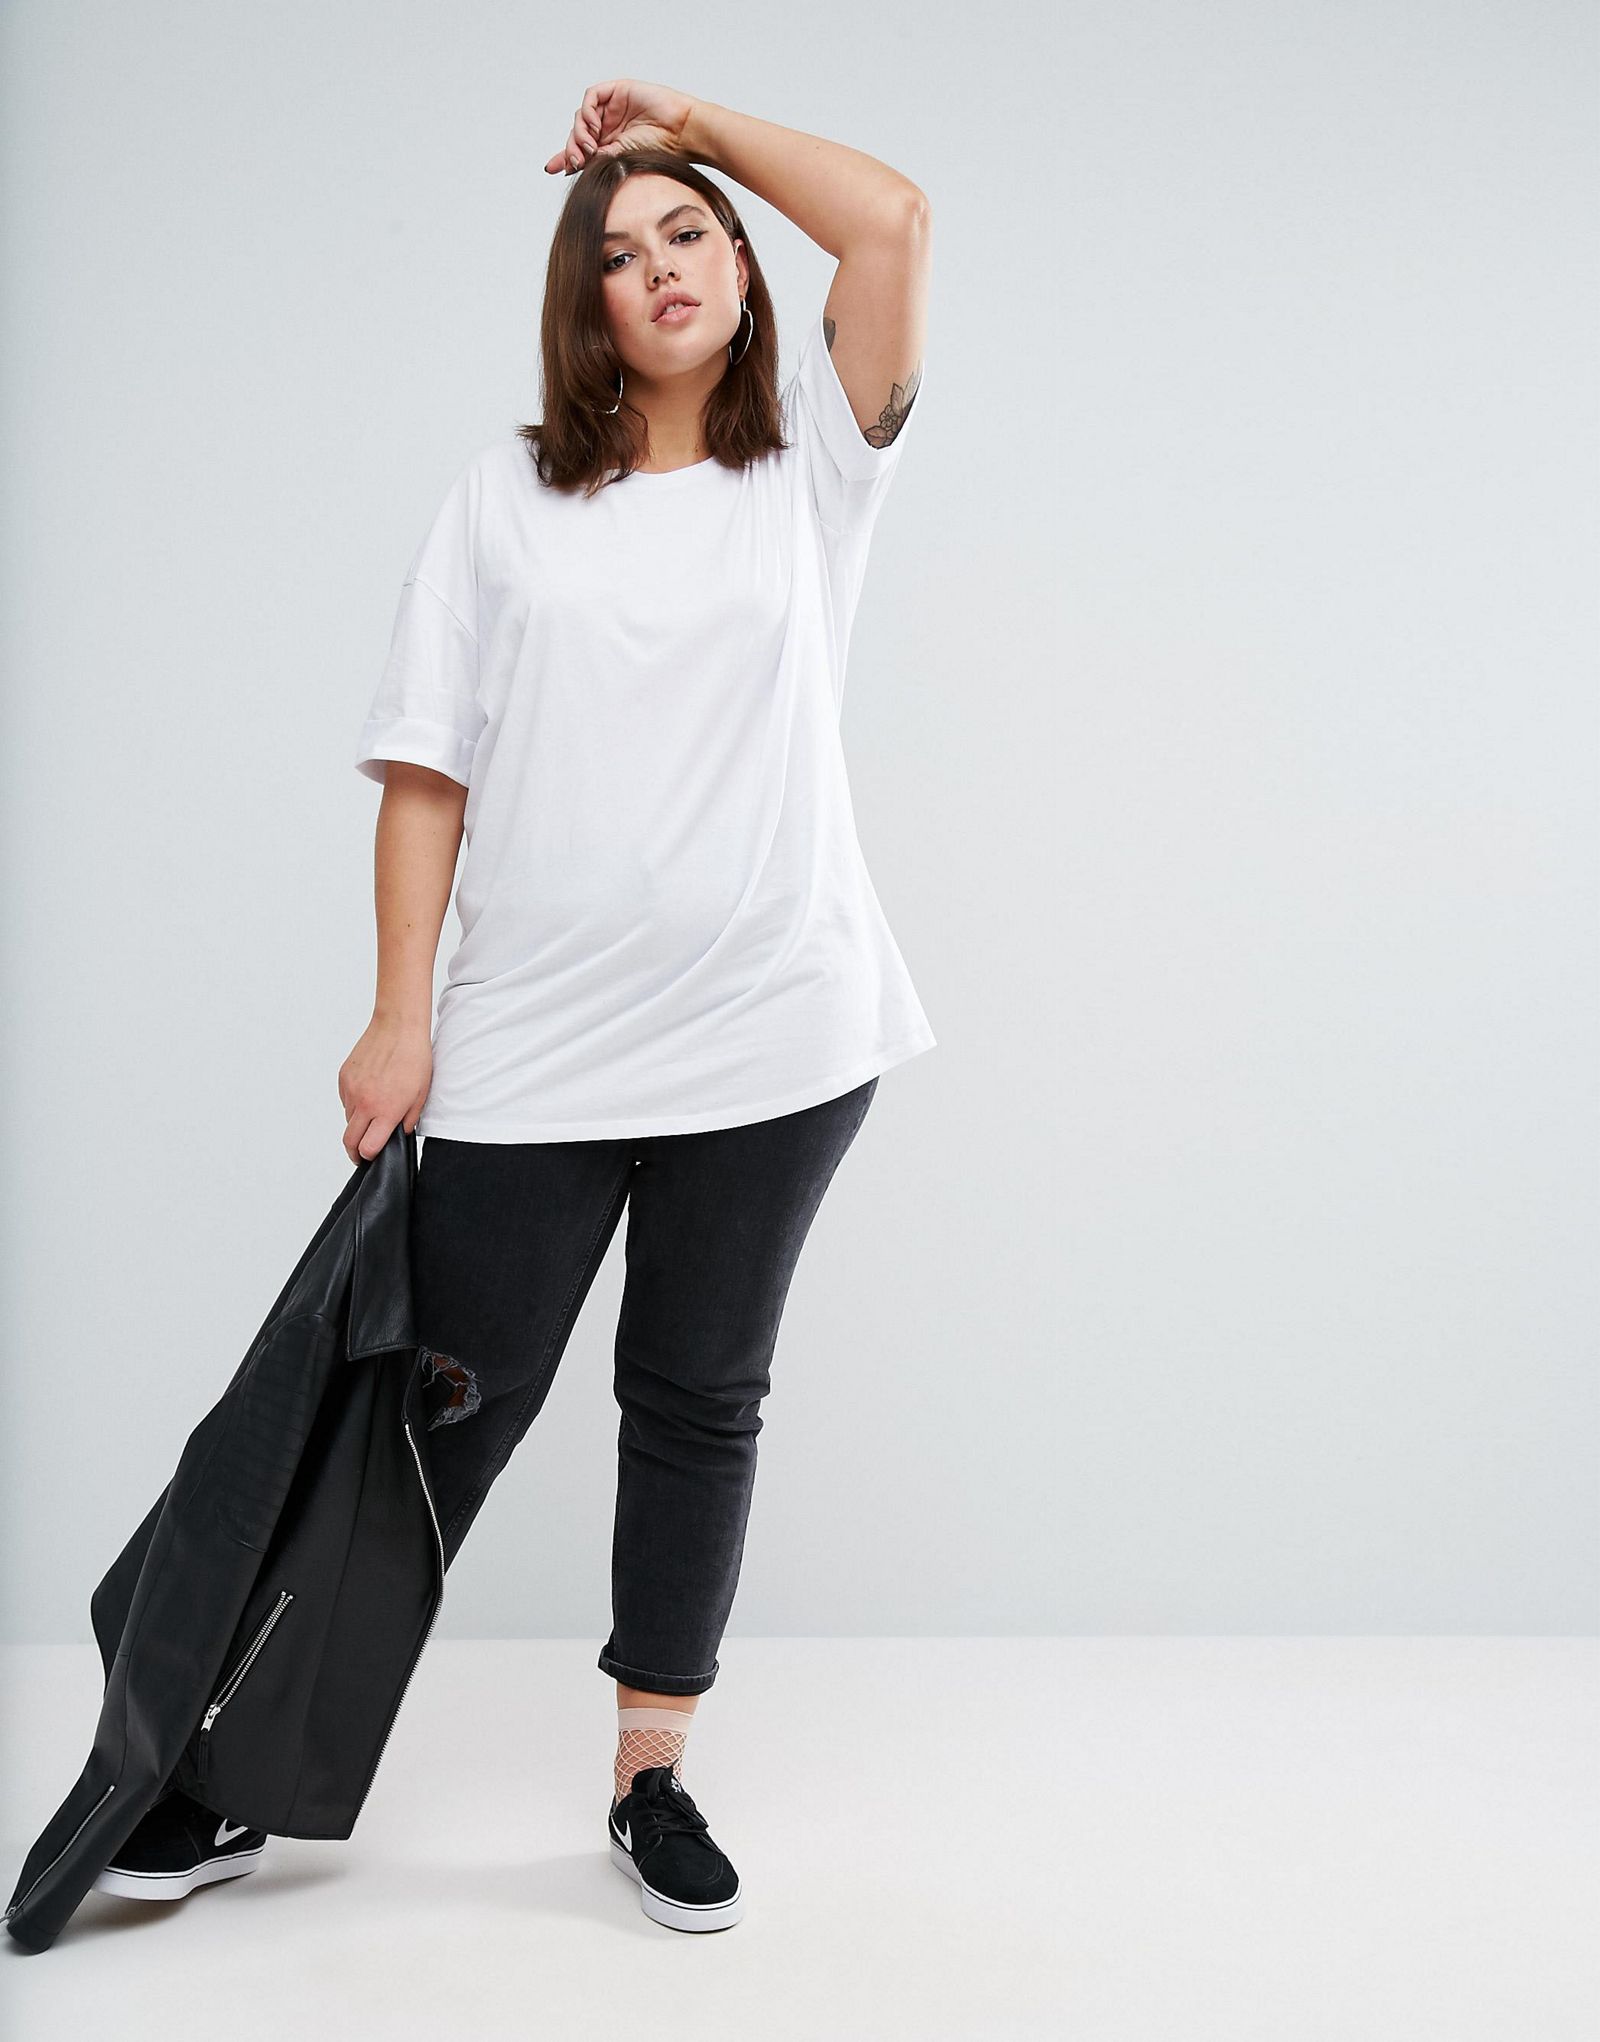 ASOS CURVE Oversized Tunic T-Shirt 2 Pack SAVE 15%